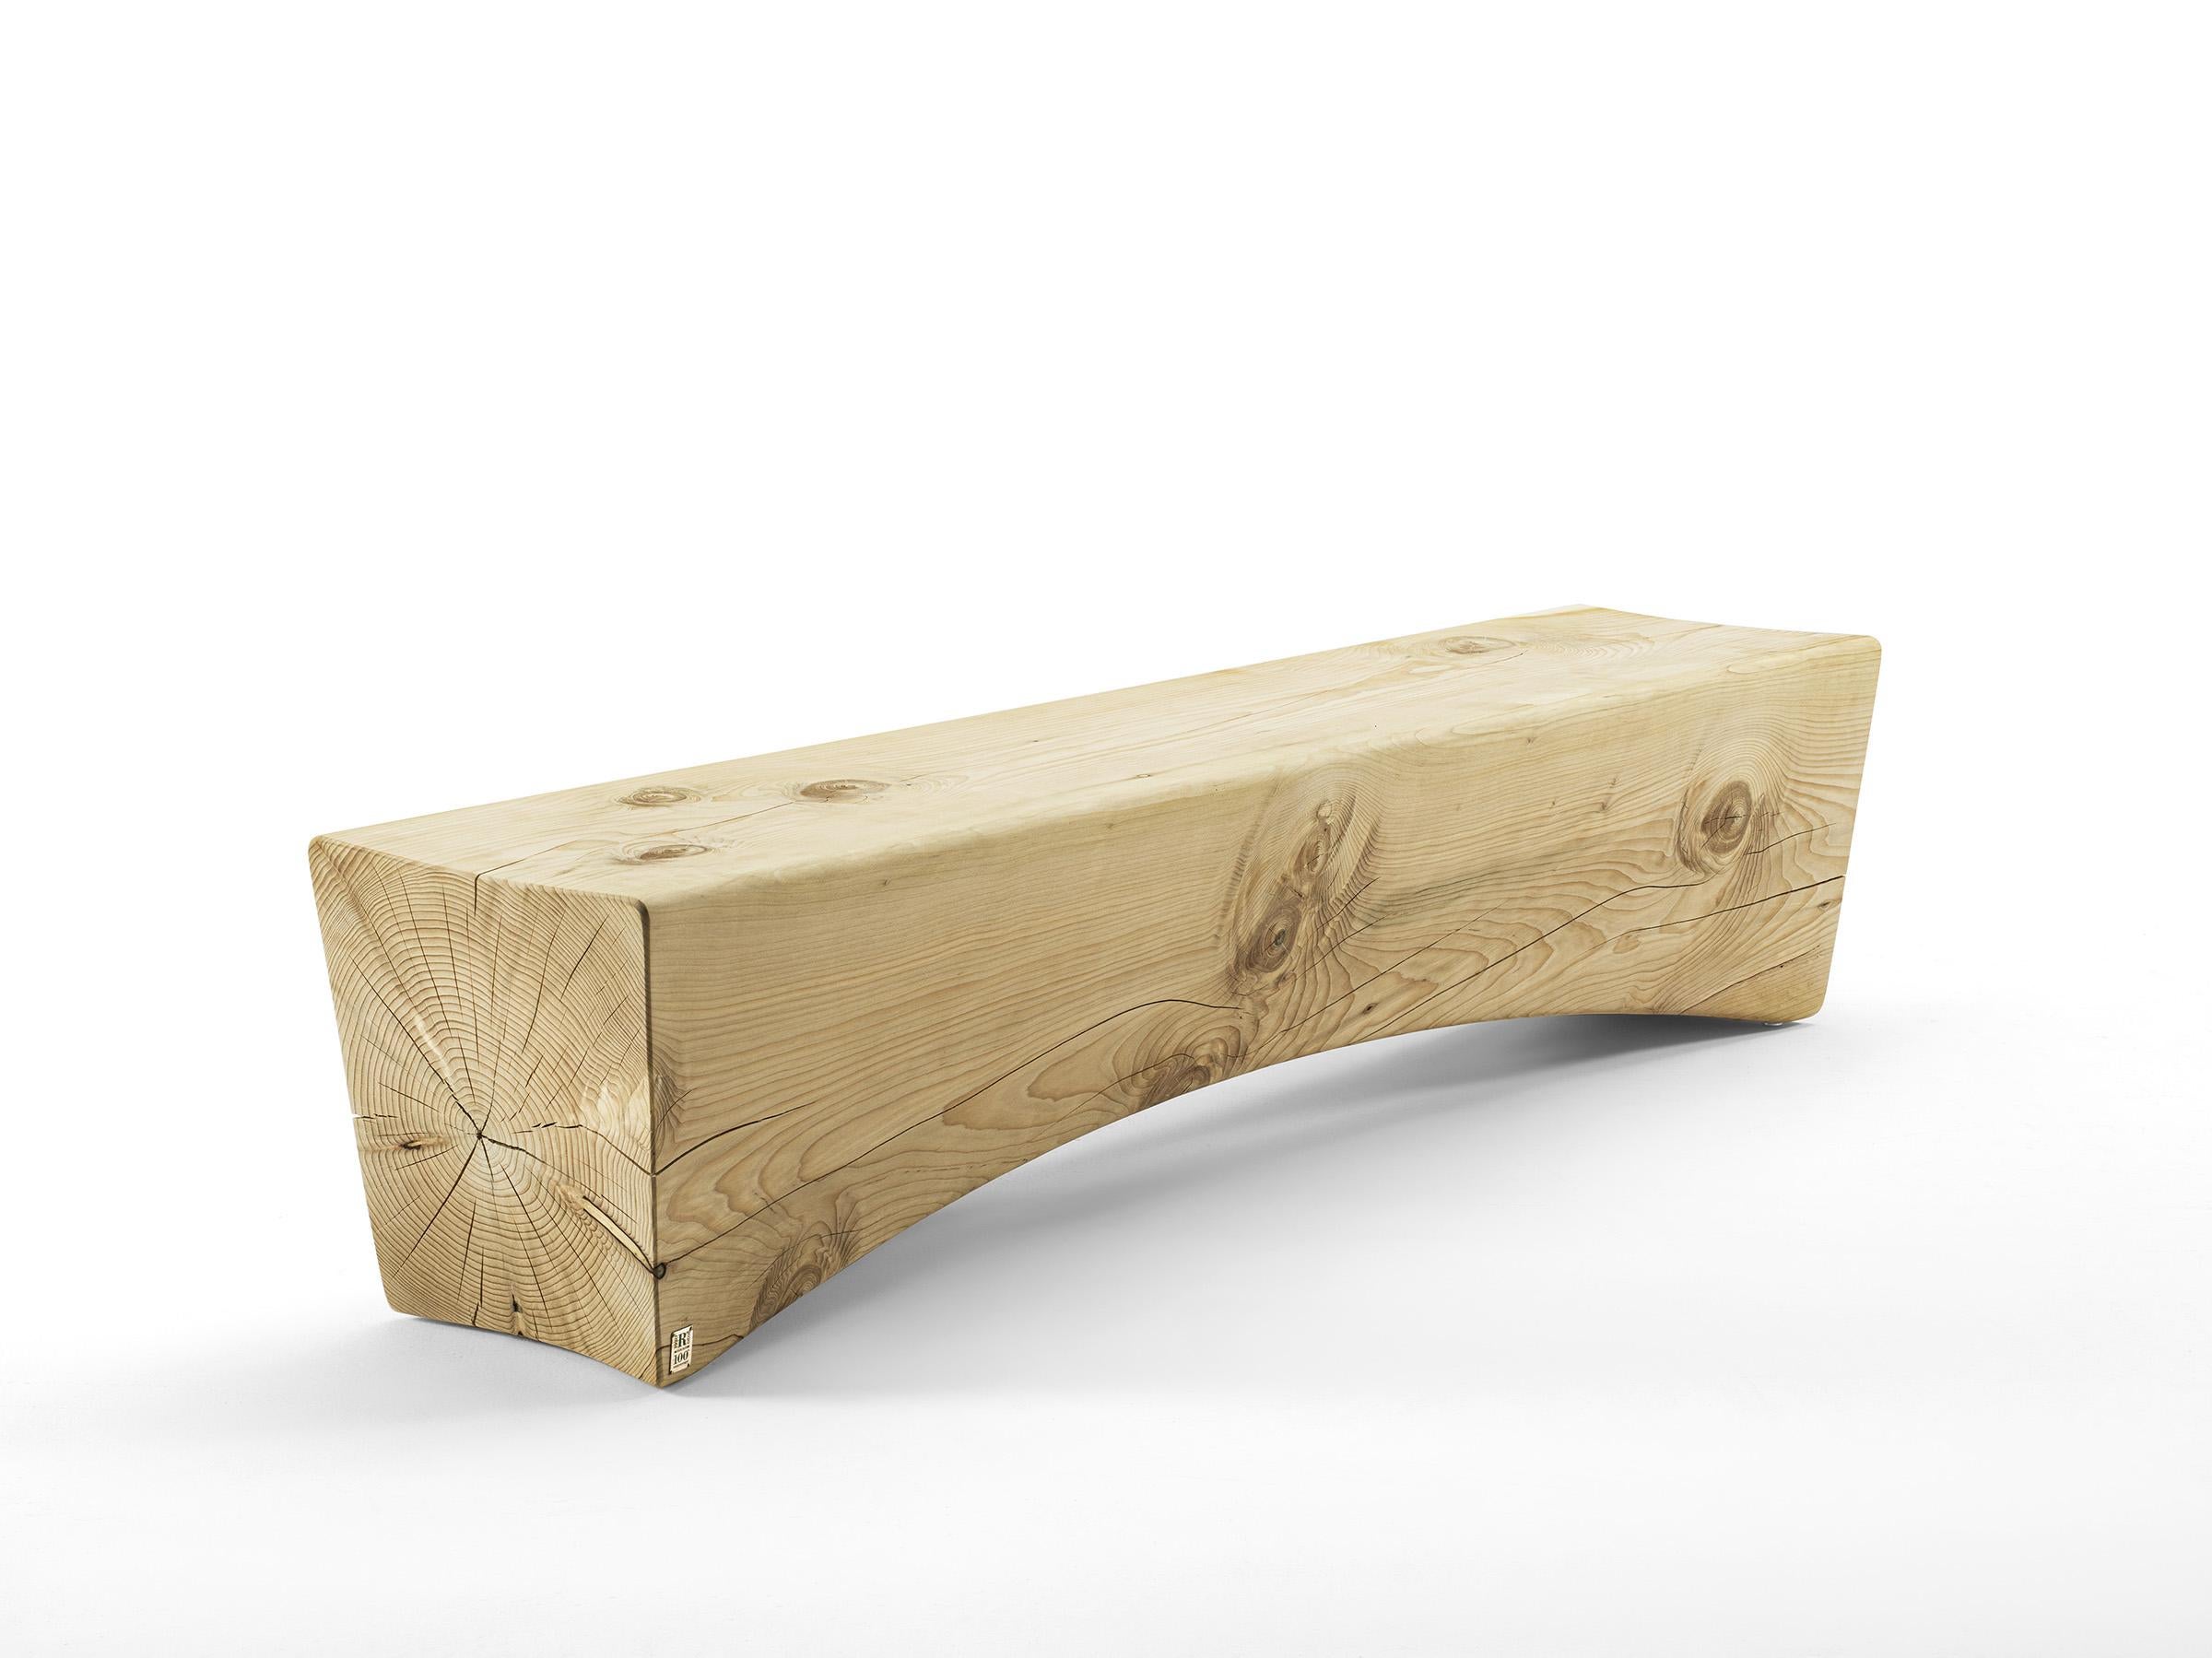 Solid scented cedar wood bench carved from a single block, characterised by a square, linear shape that meets a curved shape below the seating surface, lightening the visual effect.

Designed by Vegni Design and made in Italy

Available in the below